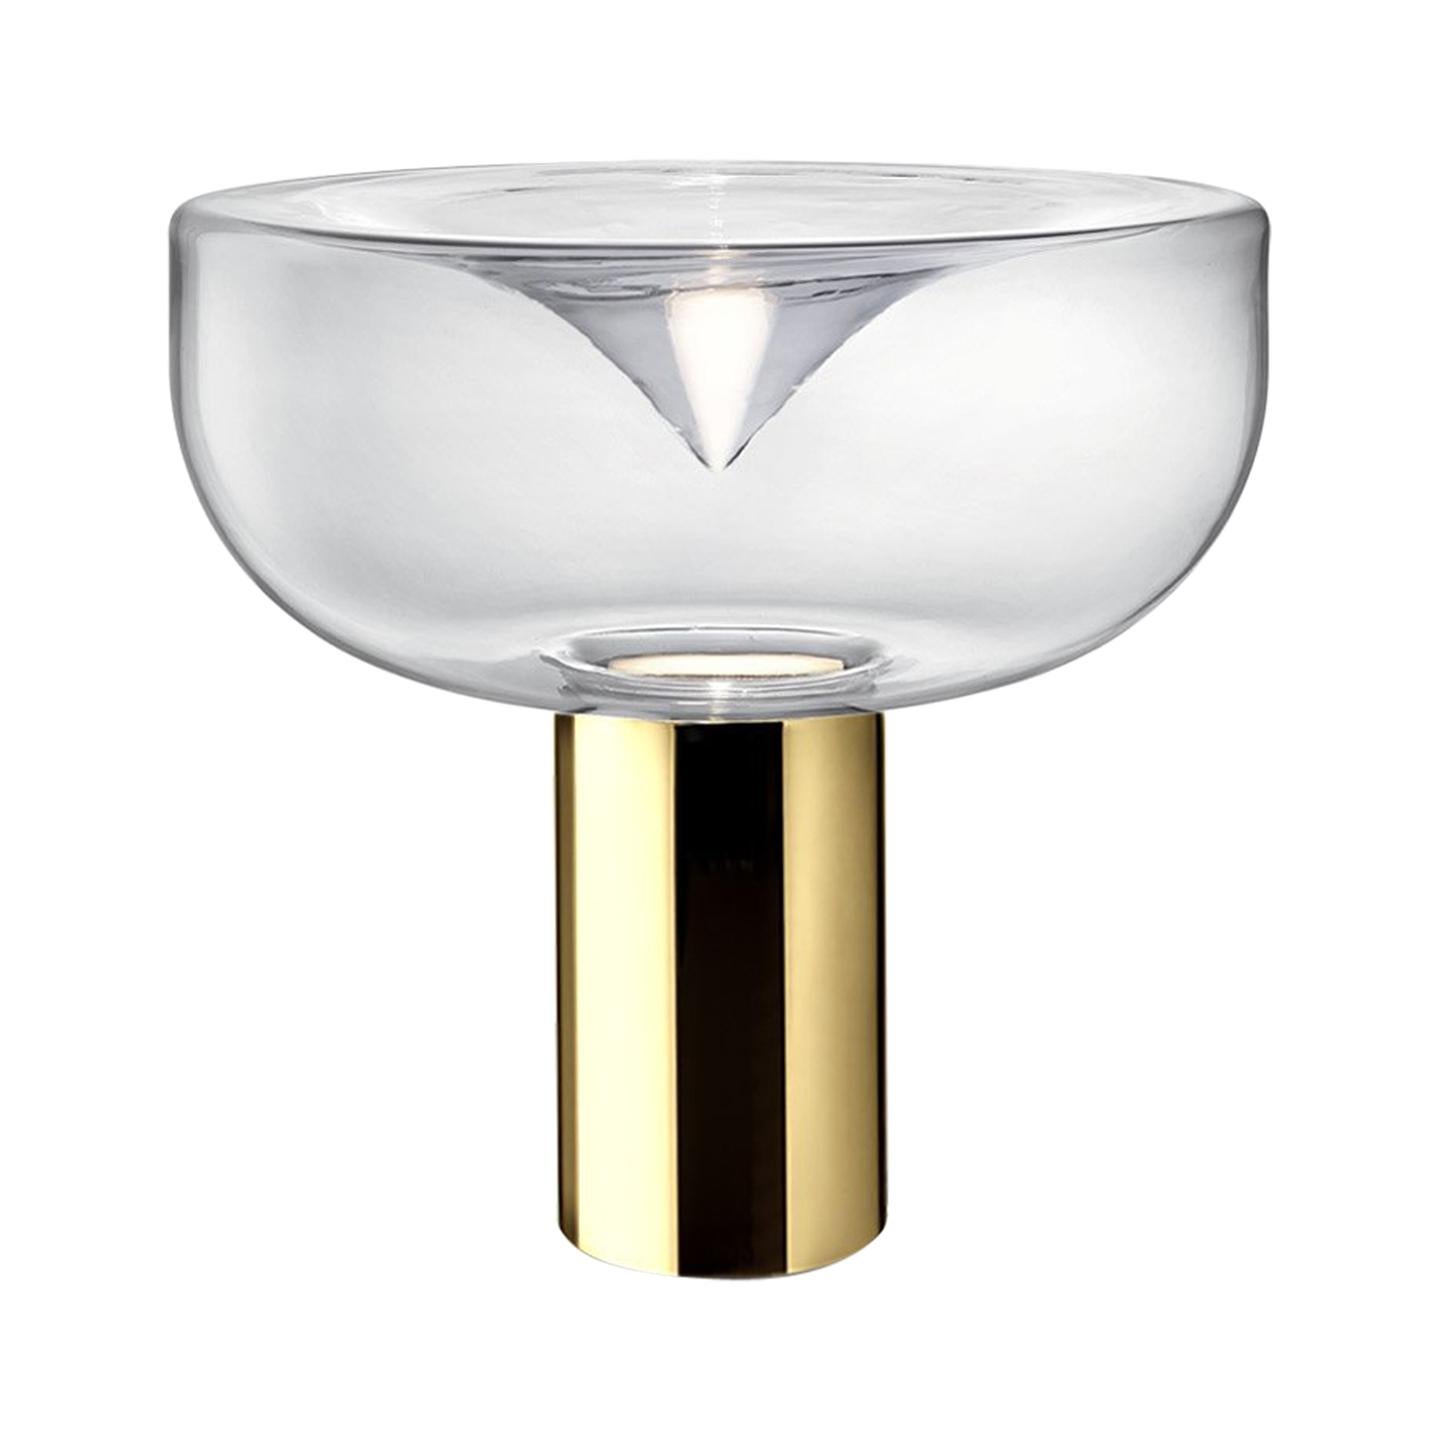 Leucos Aella Mini T 30 LED Table Light in Transparent and Gold by Toso & Massari